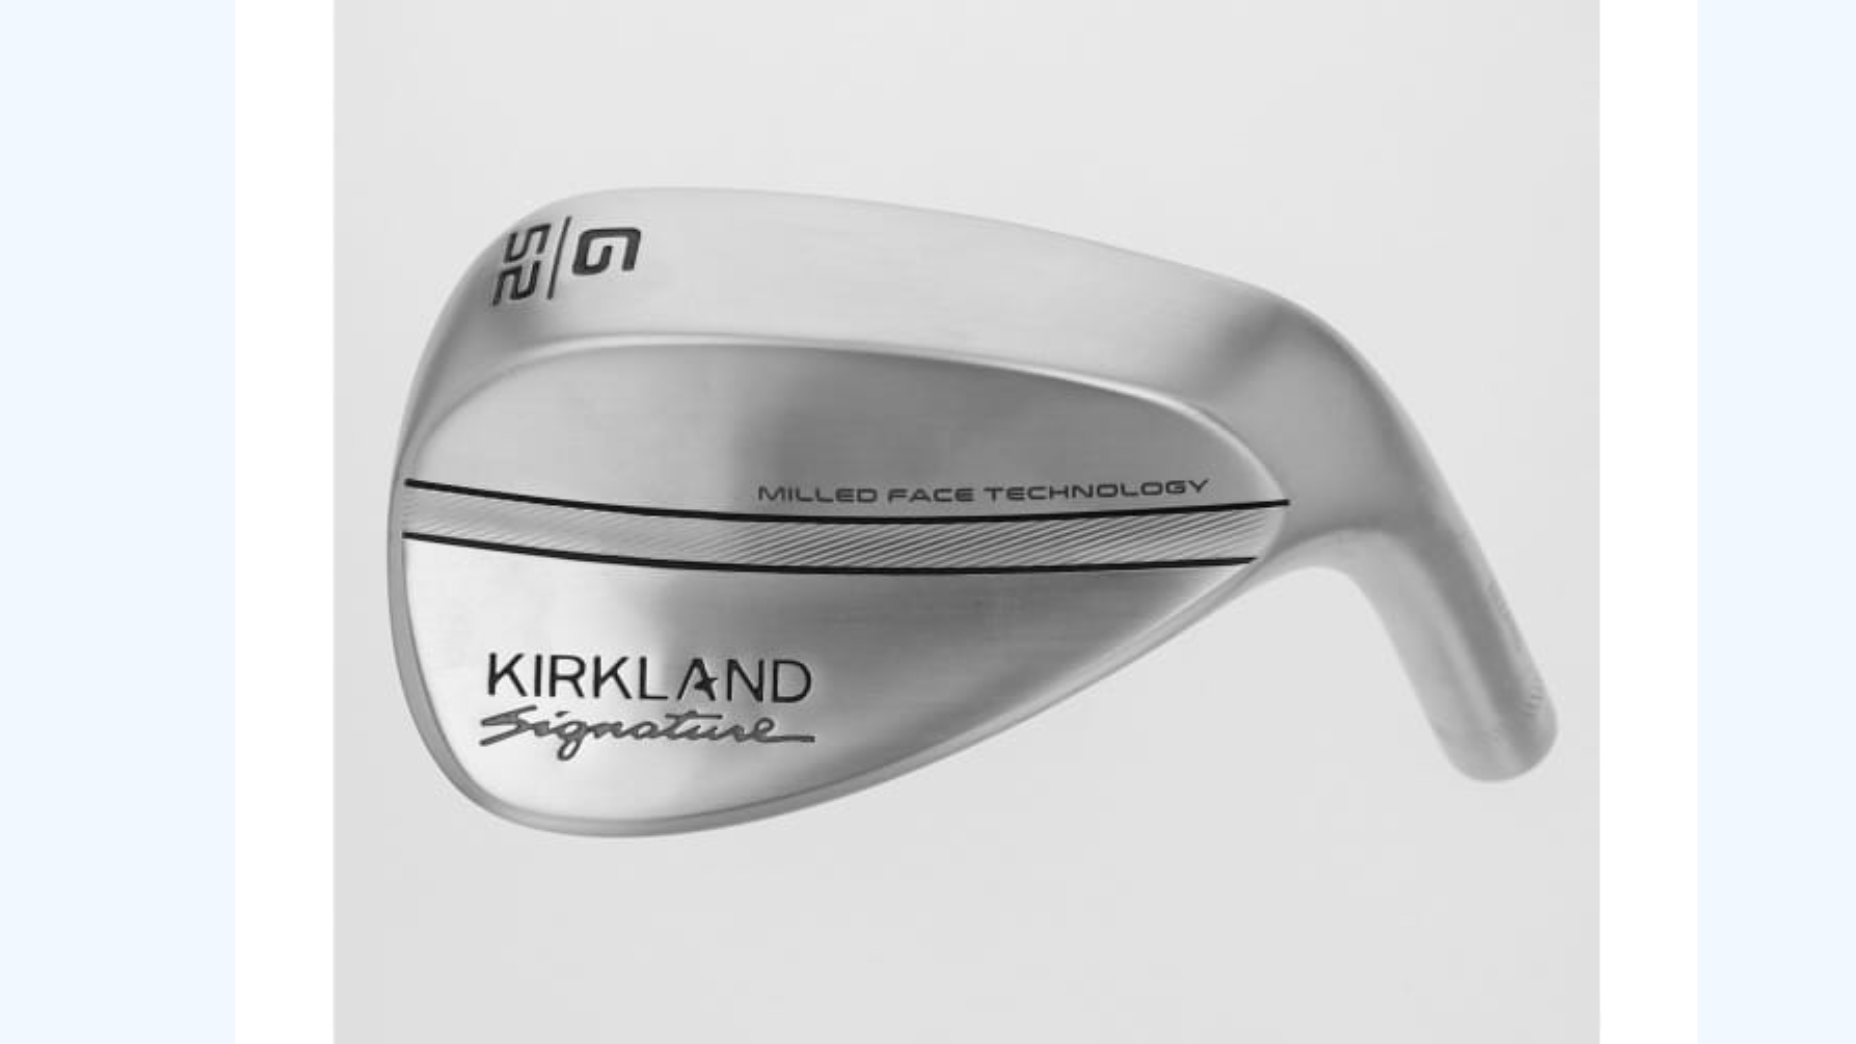 Costco's $499 Kirkland Signature irons sold out in just hours